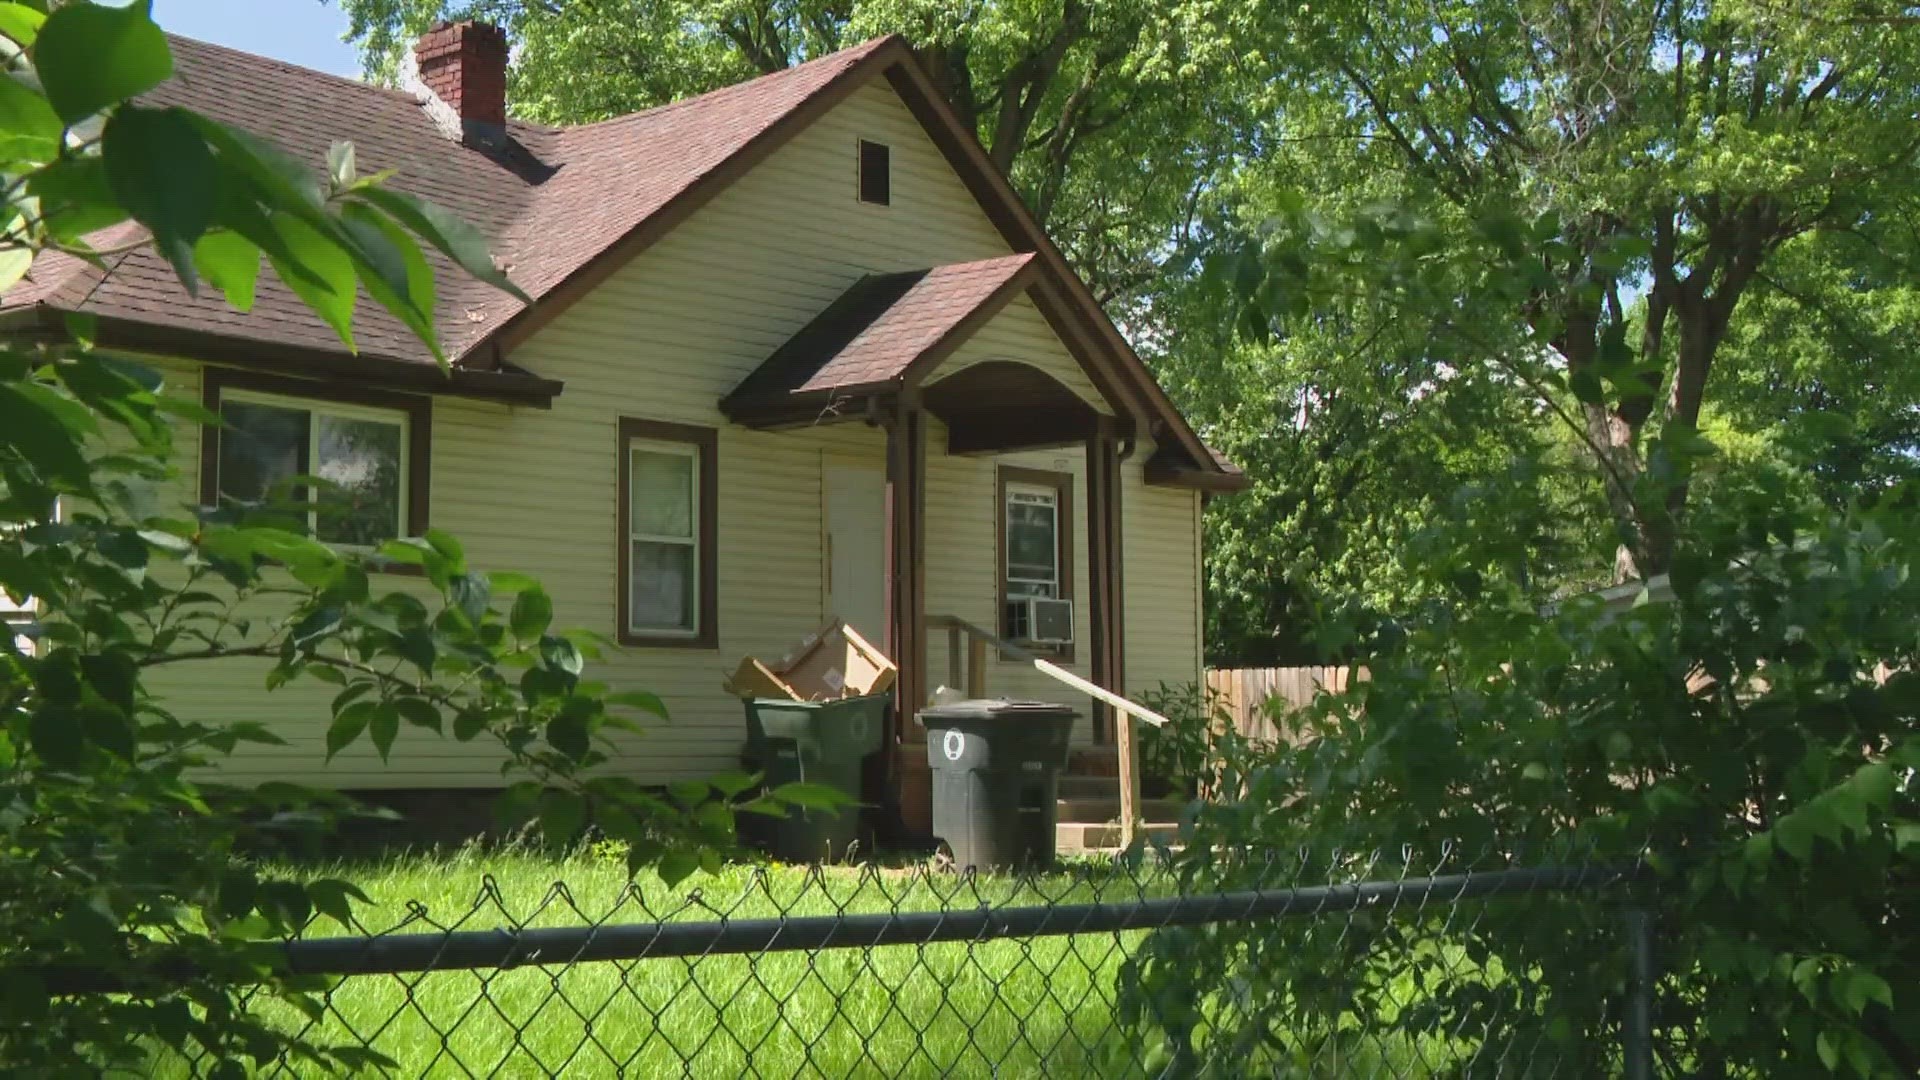 A 3-year-old and 1-year-old were found dead alongside a man in Muncie on Sunday.